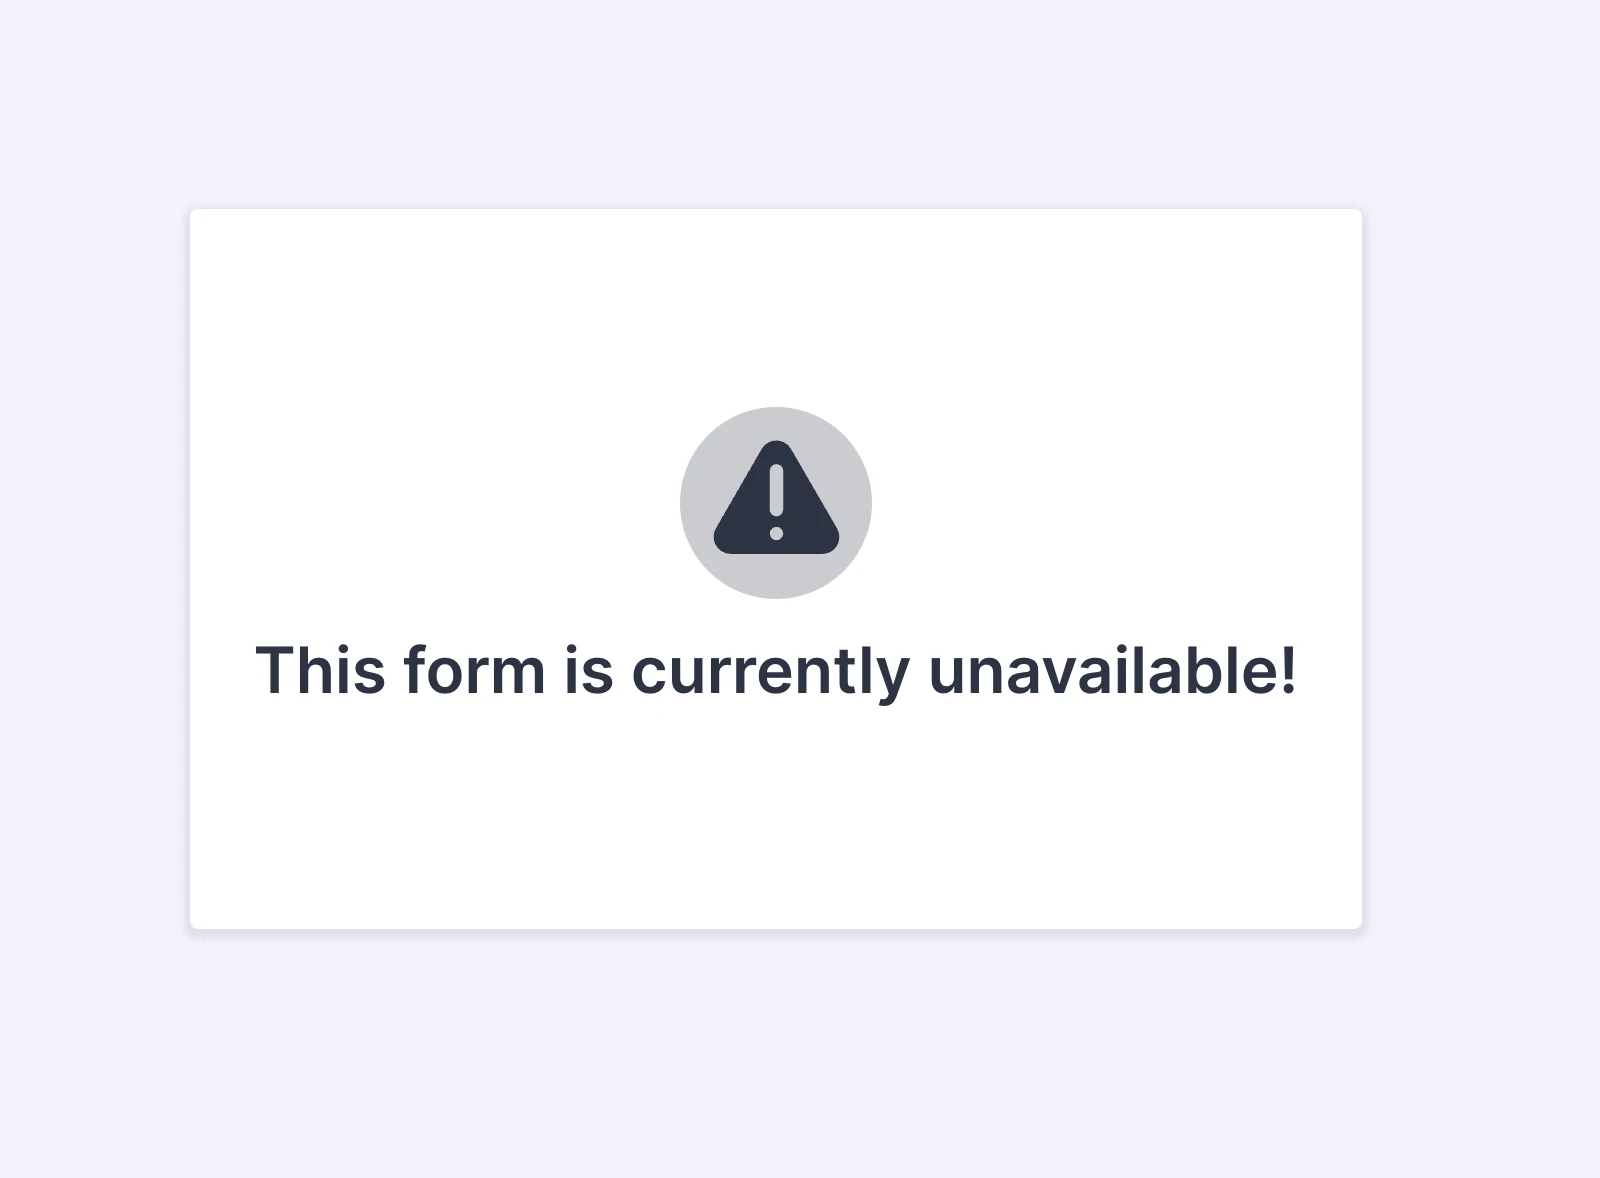 Unable to access the form Image 1 Screenshot 20